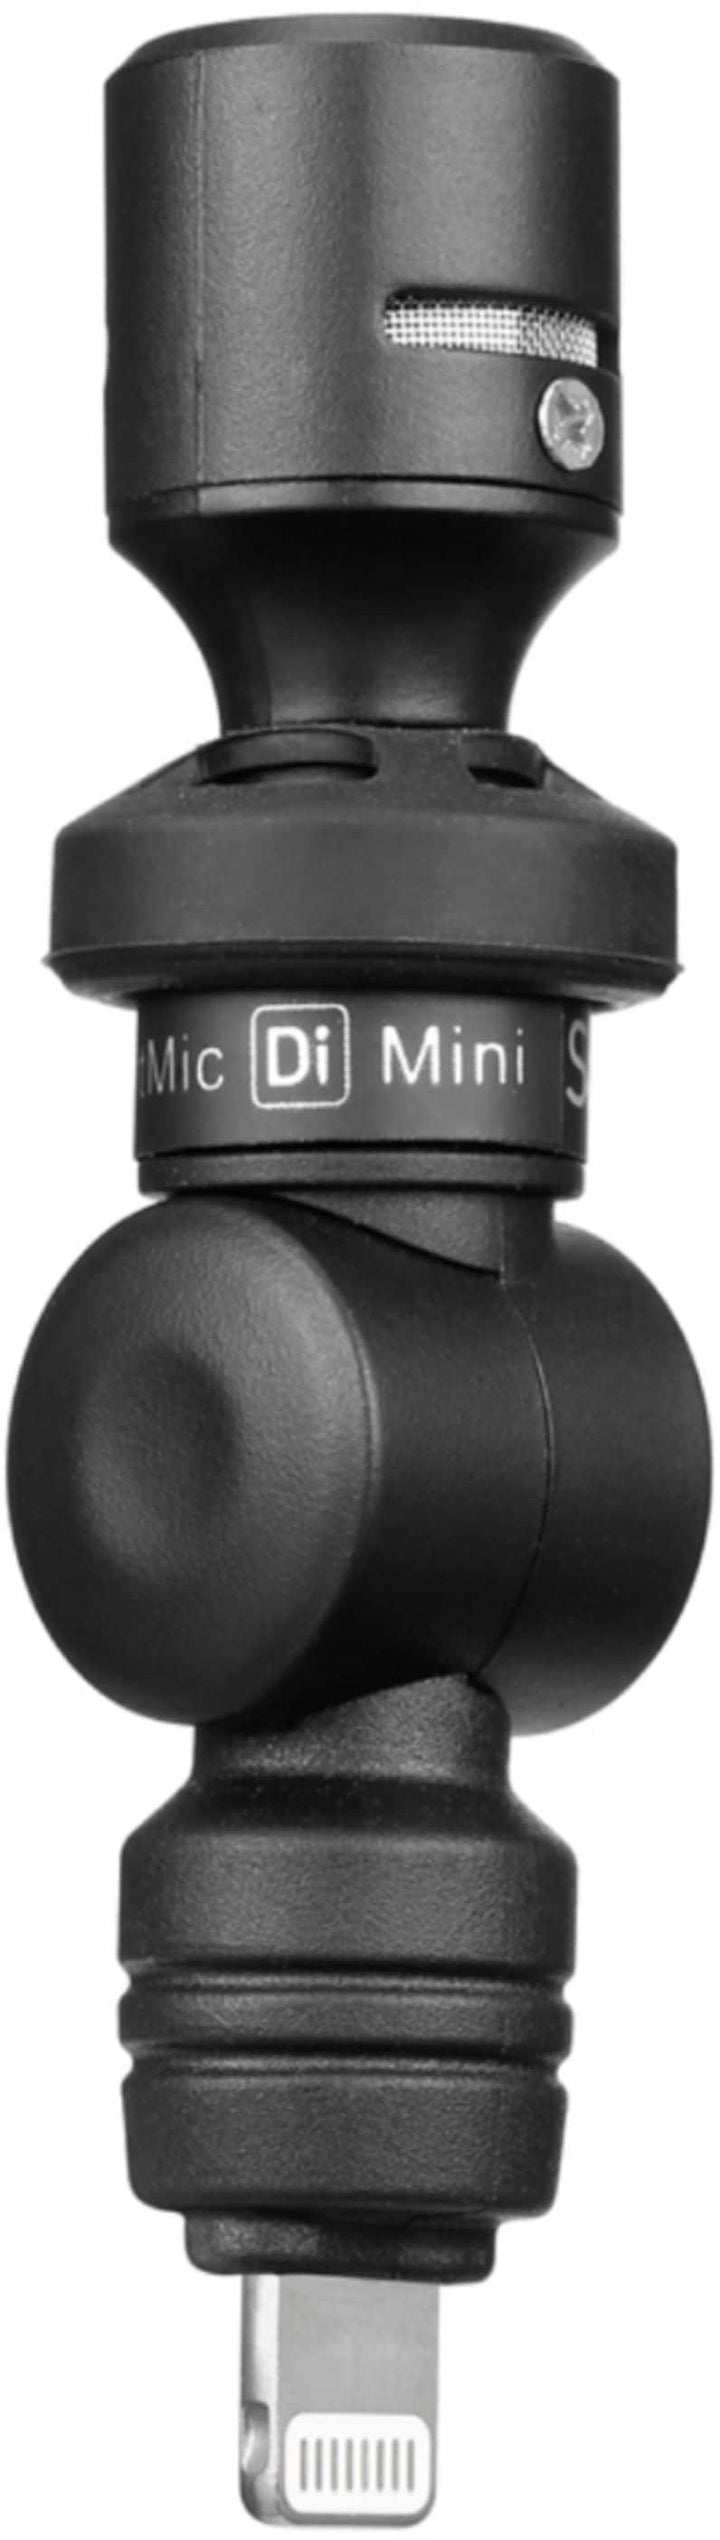 Saramonic - SmartMic DI Mini Ultra-Compact Condenser Microphone with Lightning for Apple iPhones & iPads_3